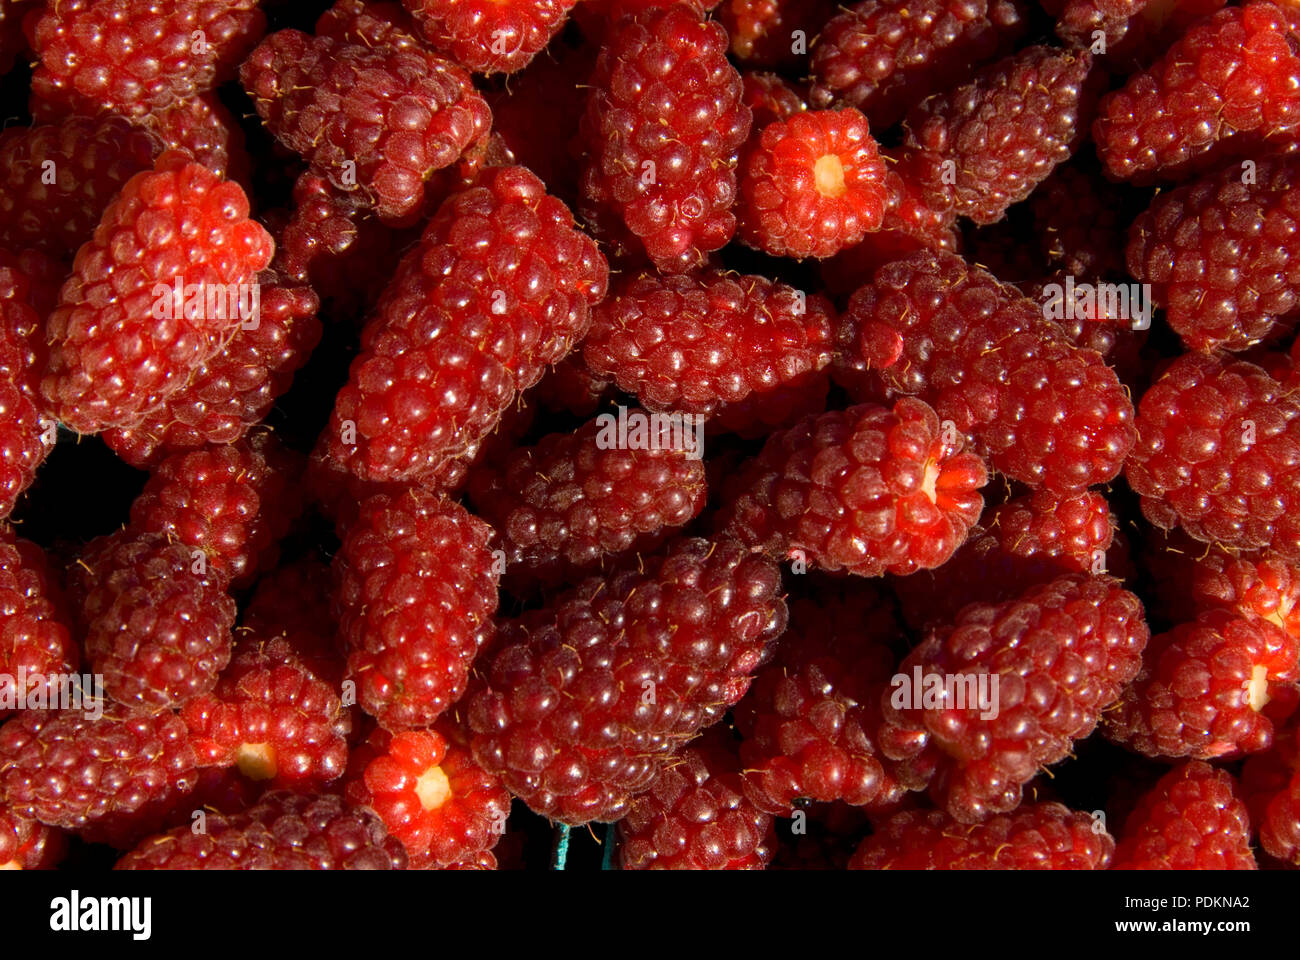 Tayberries (mix between raspberry and blackberry), Marion County, Oregon Stock Photo